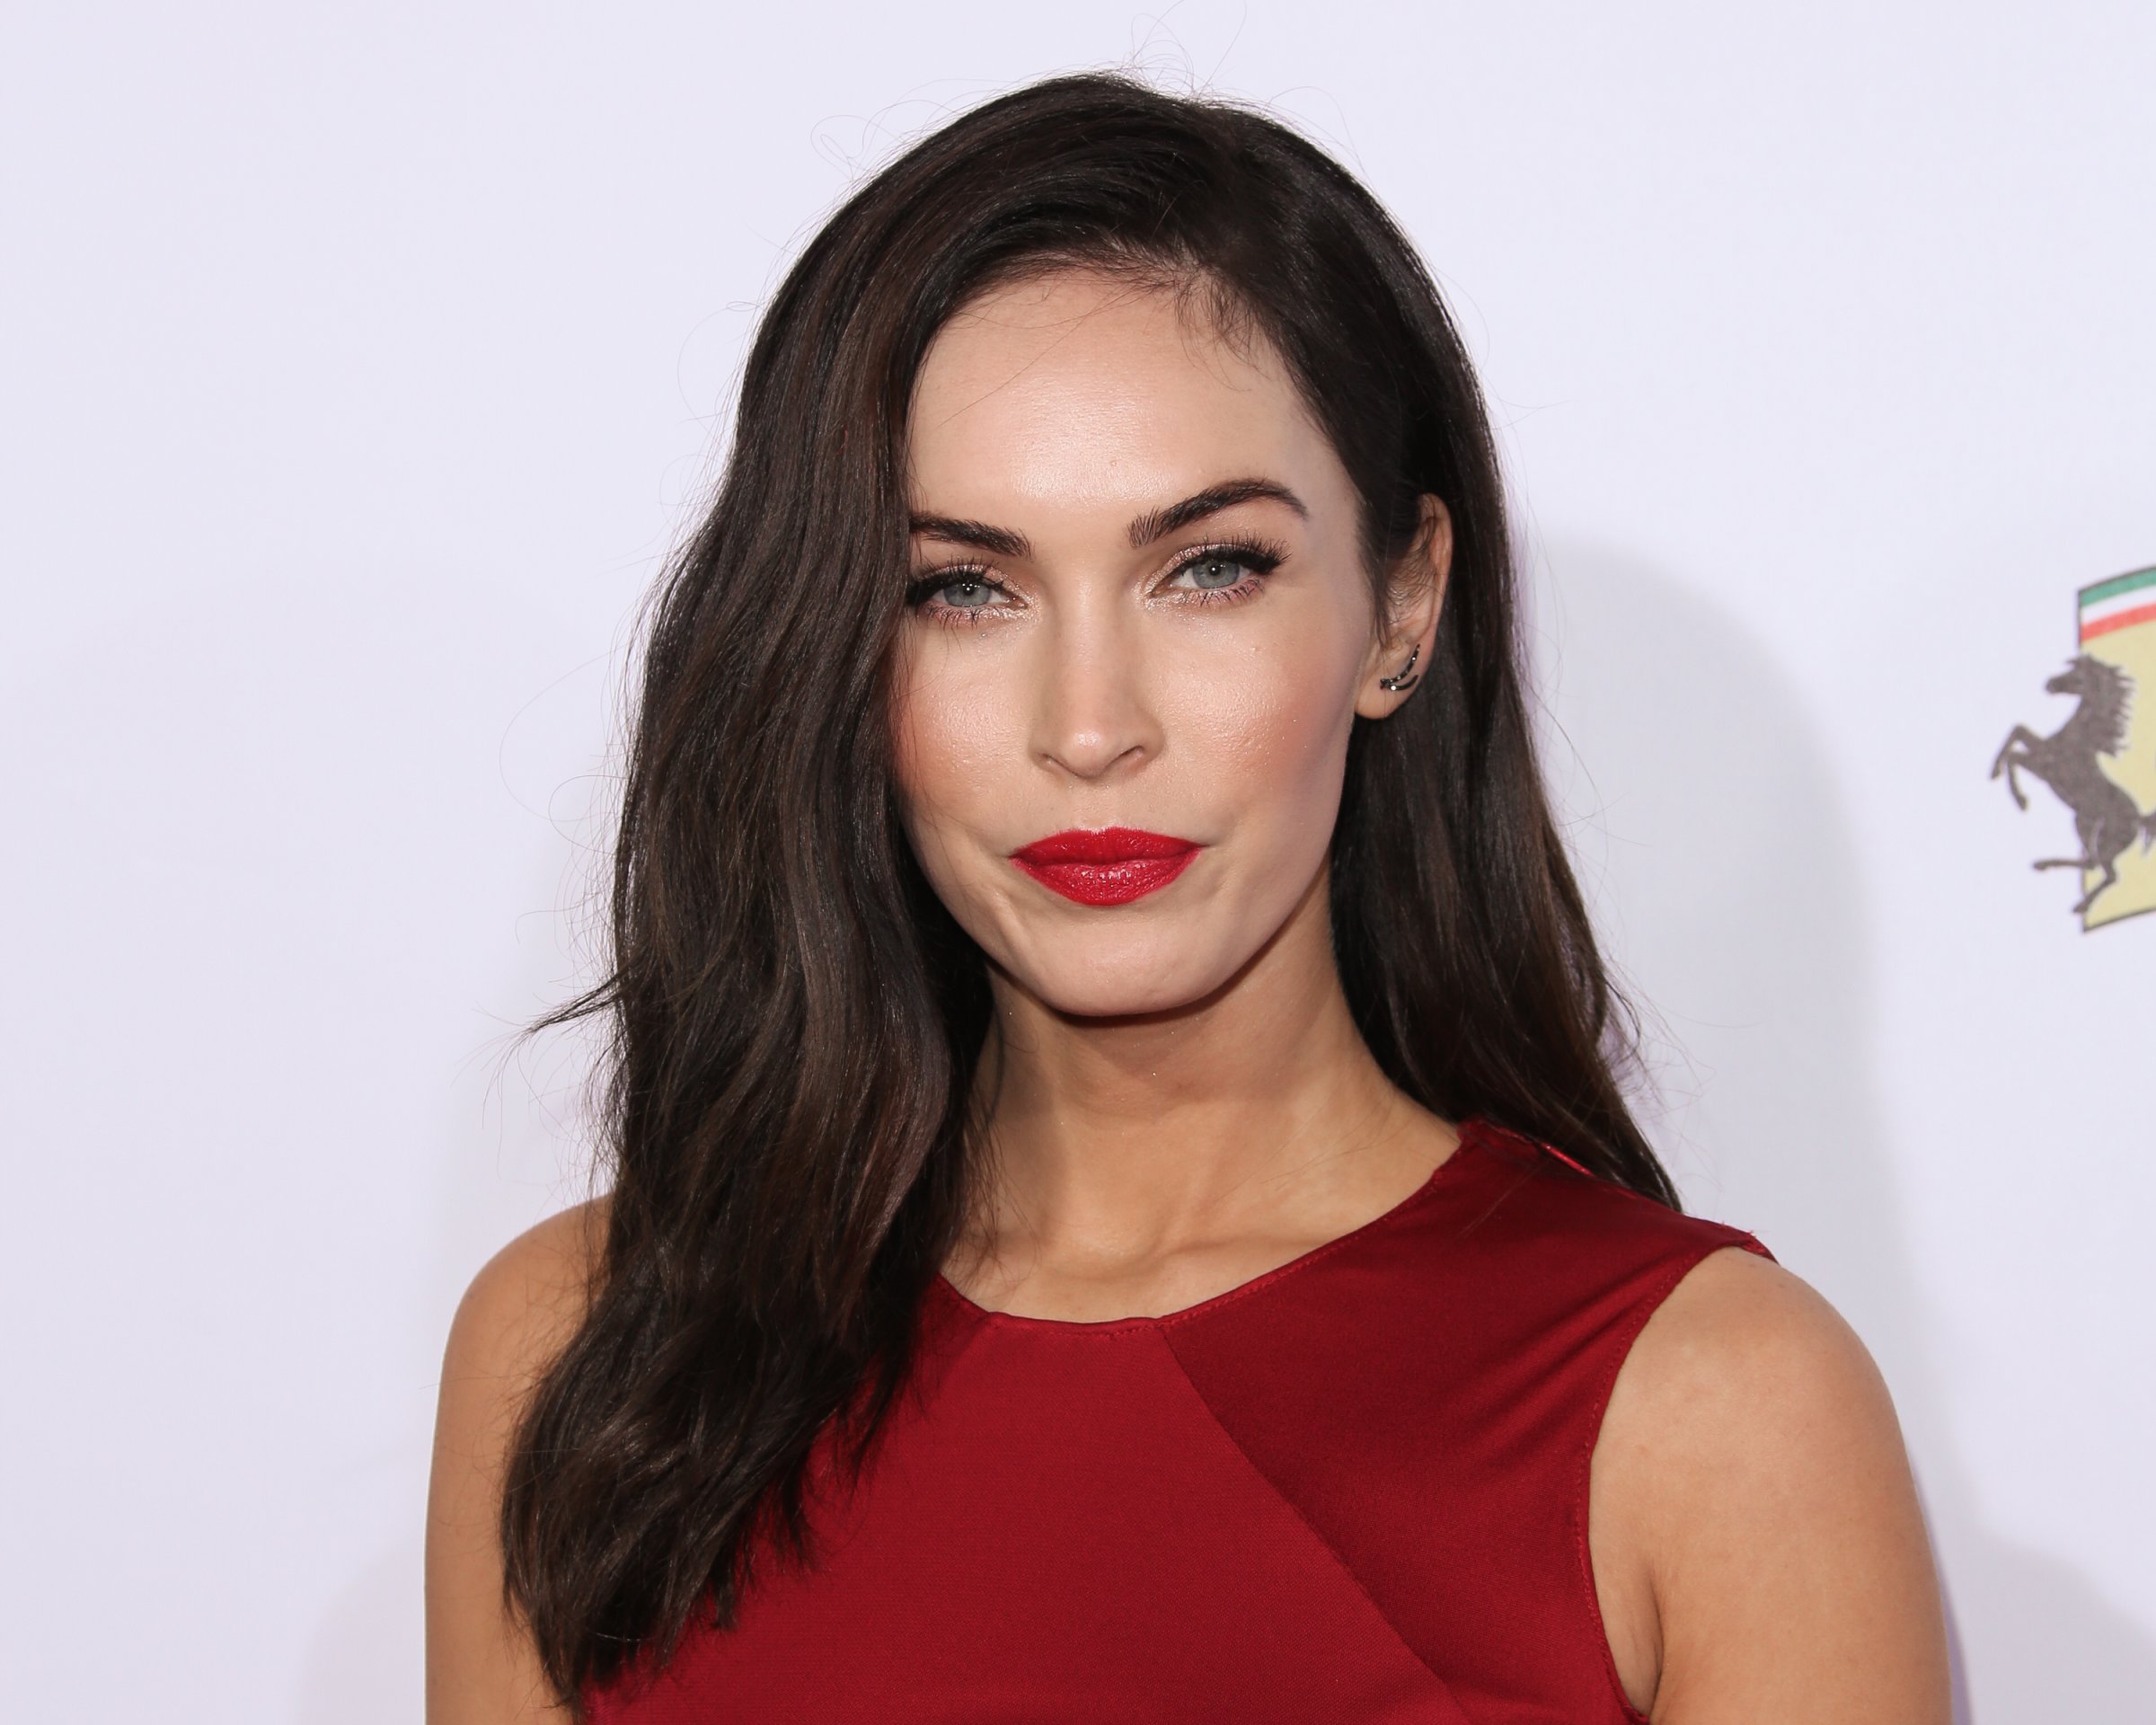 Megan Fox attends Ferrari's 60th Anniversary In The USA Gala at the Wallis Annenberg Center for the Performing Arts in Beverly Hills, Calif. on Oct. 11, 2014.